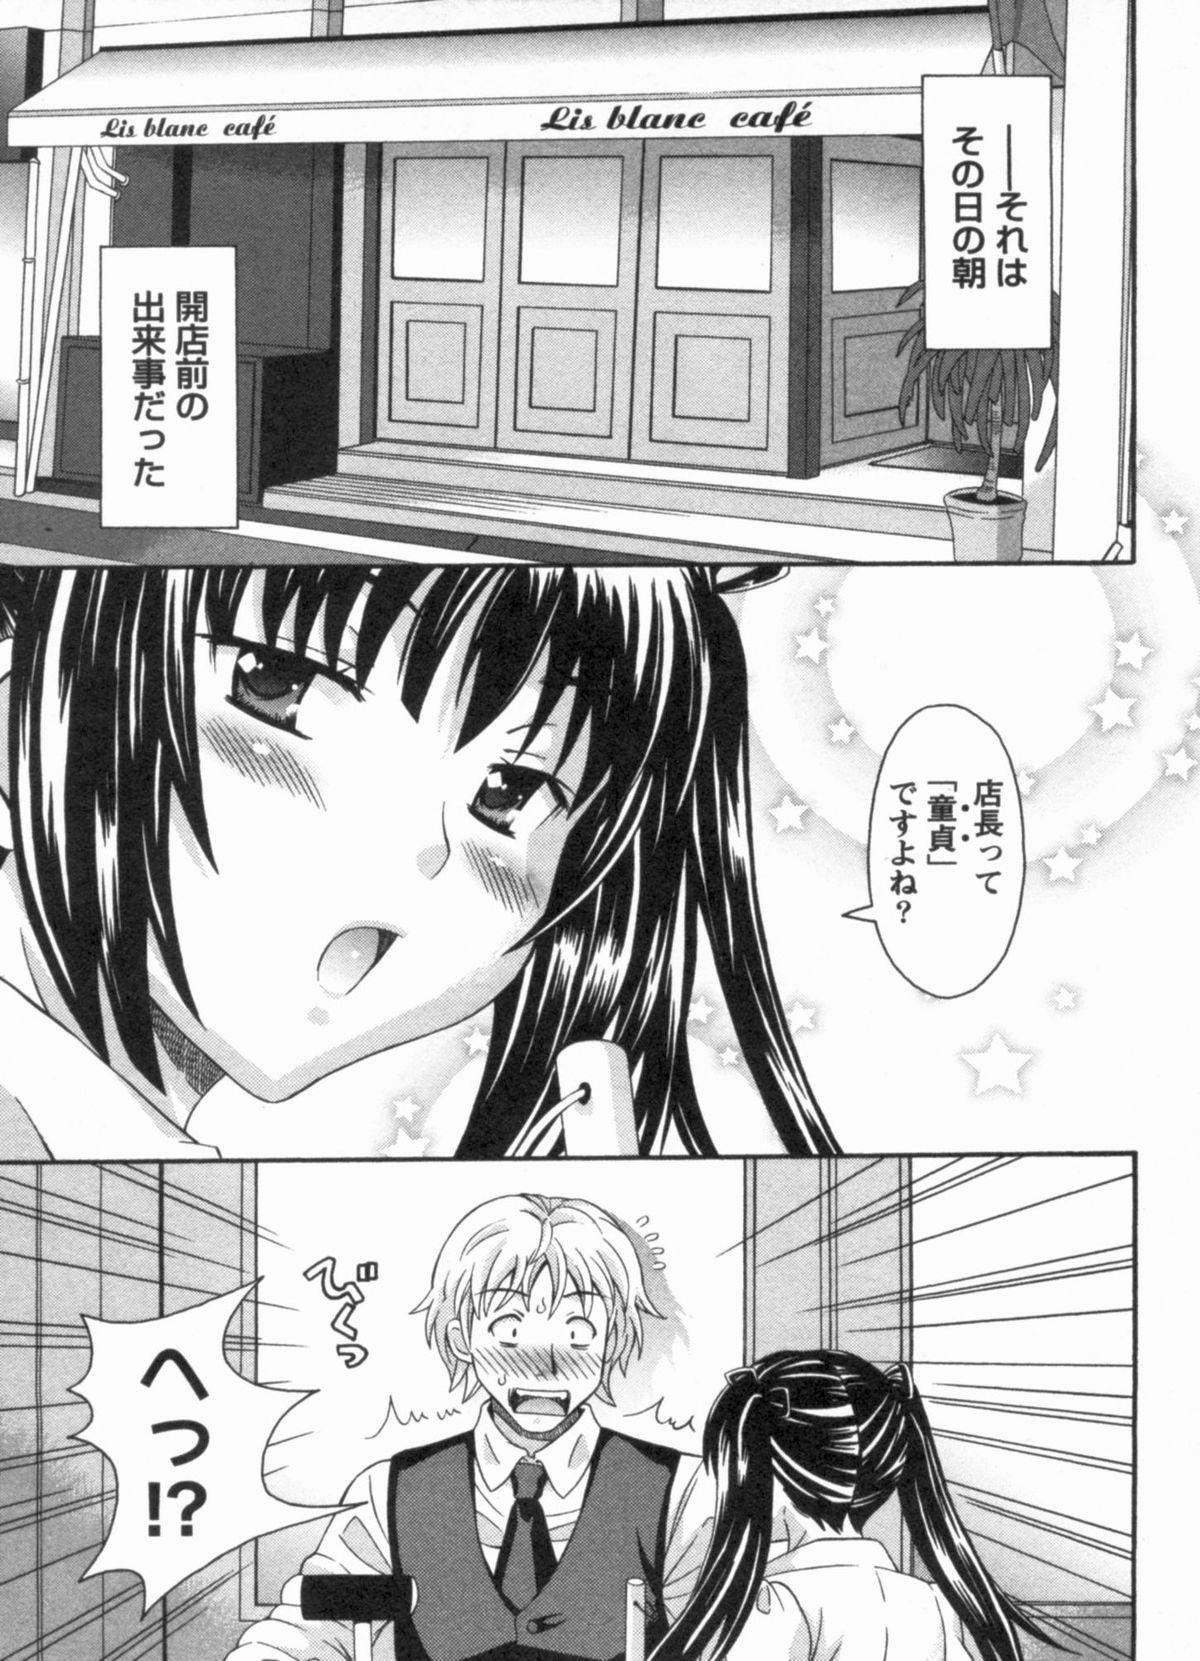 Chunky Koi Cafe ni Youkoso!! 1 - Welcome to Love&cafe!! 1 Big breasts - Page 11